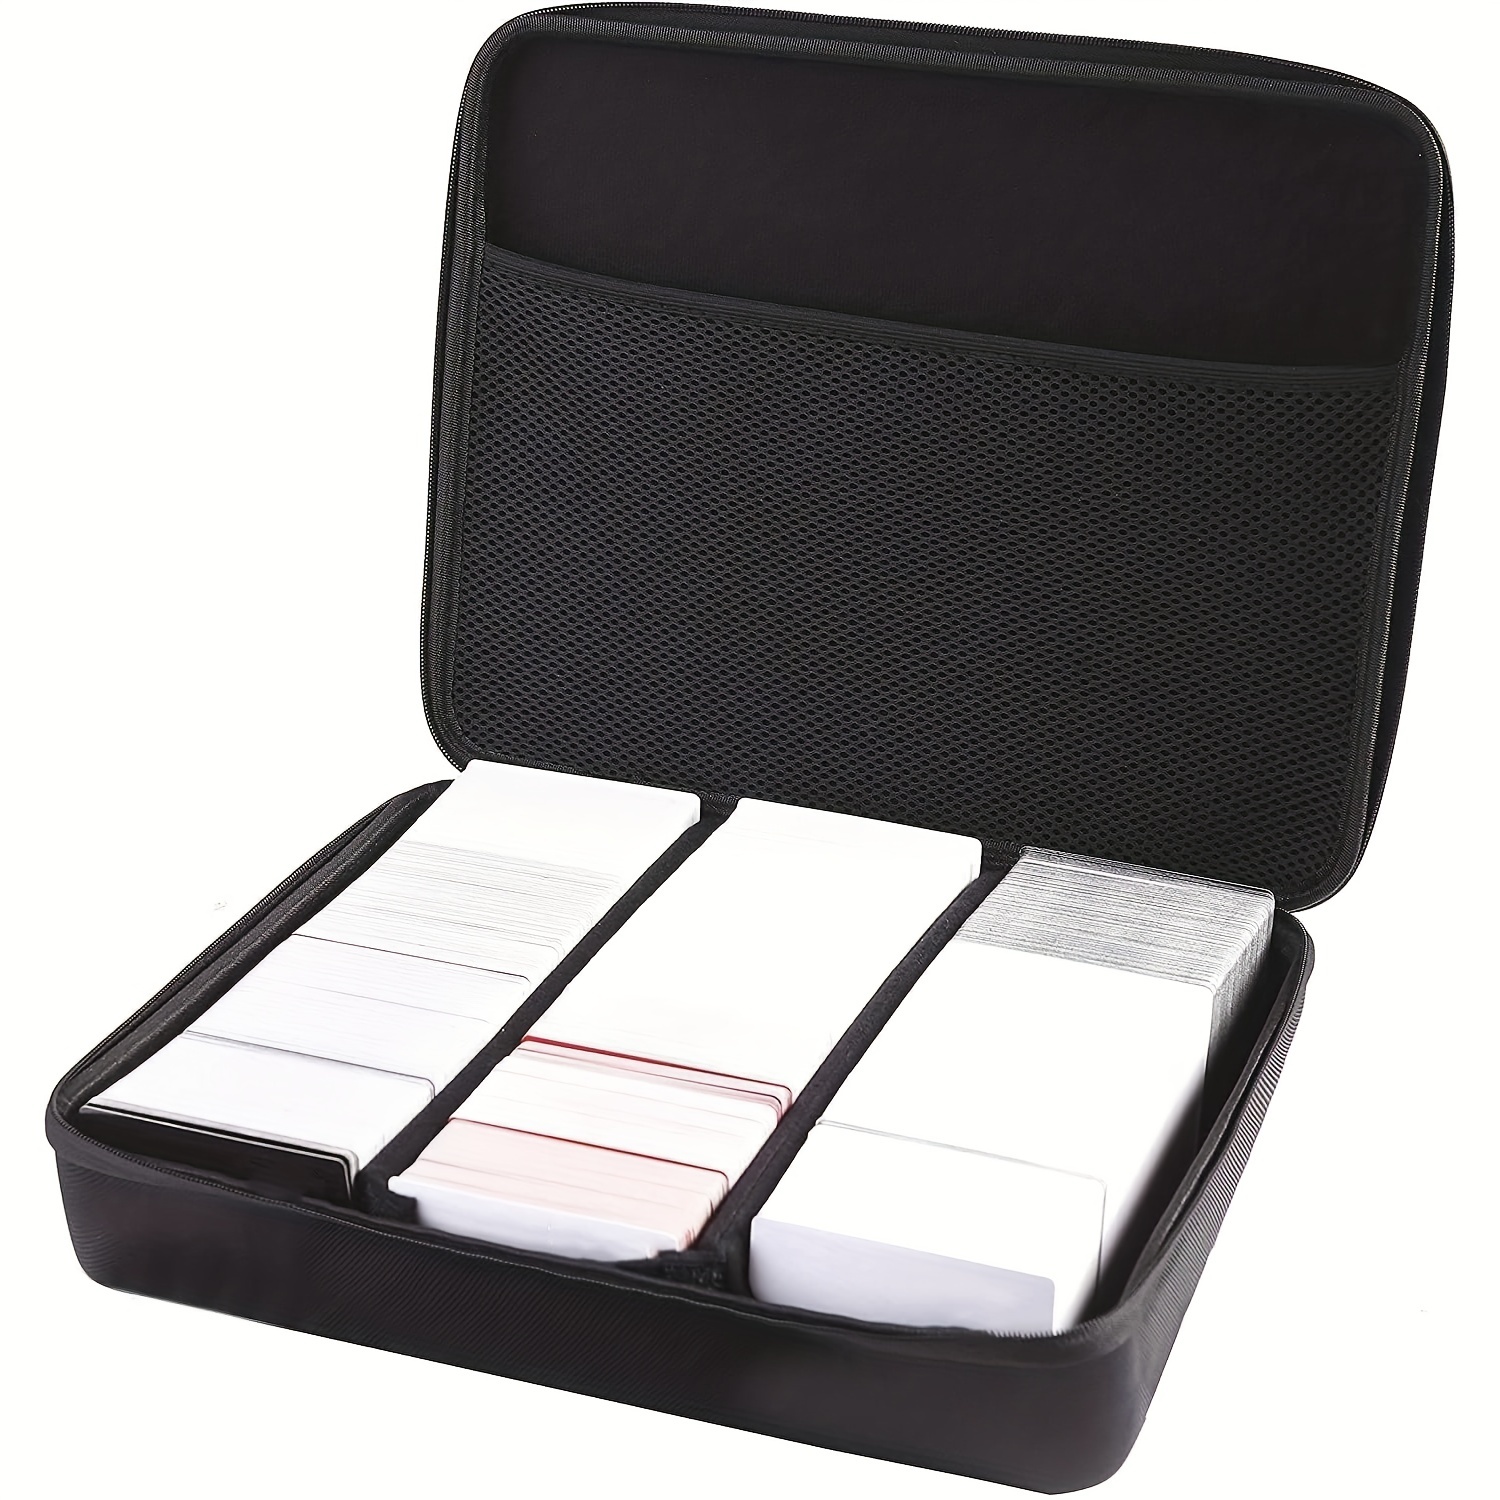 Yeaqee 6 Pcs Business Card Holder Aluminum Business Card Case Mini